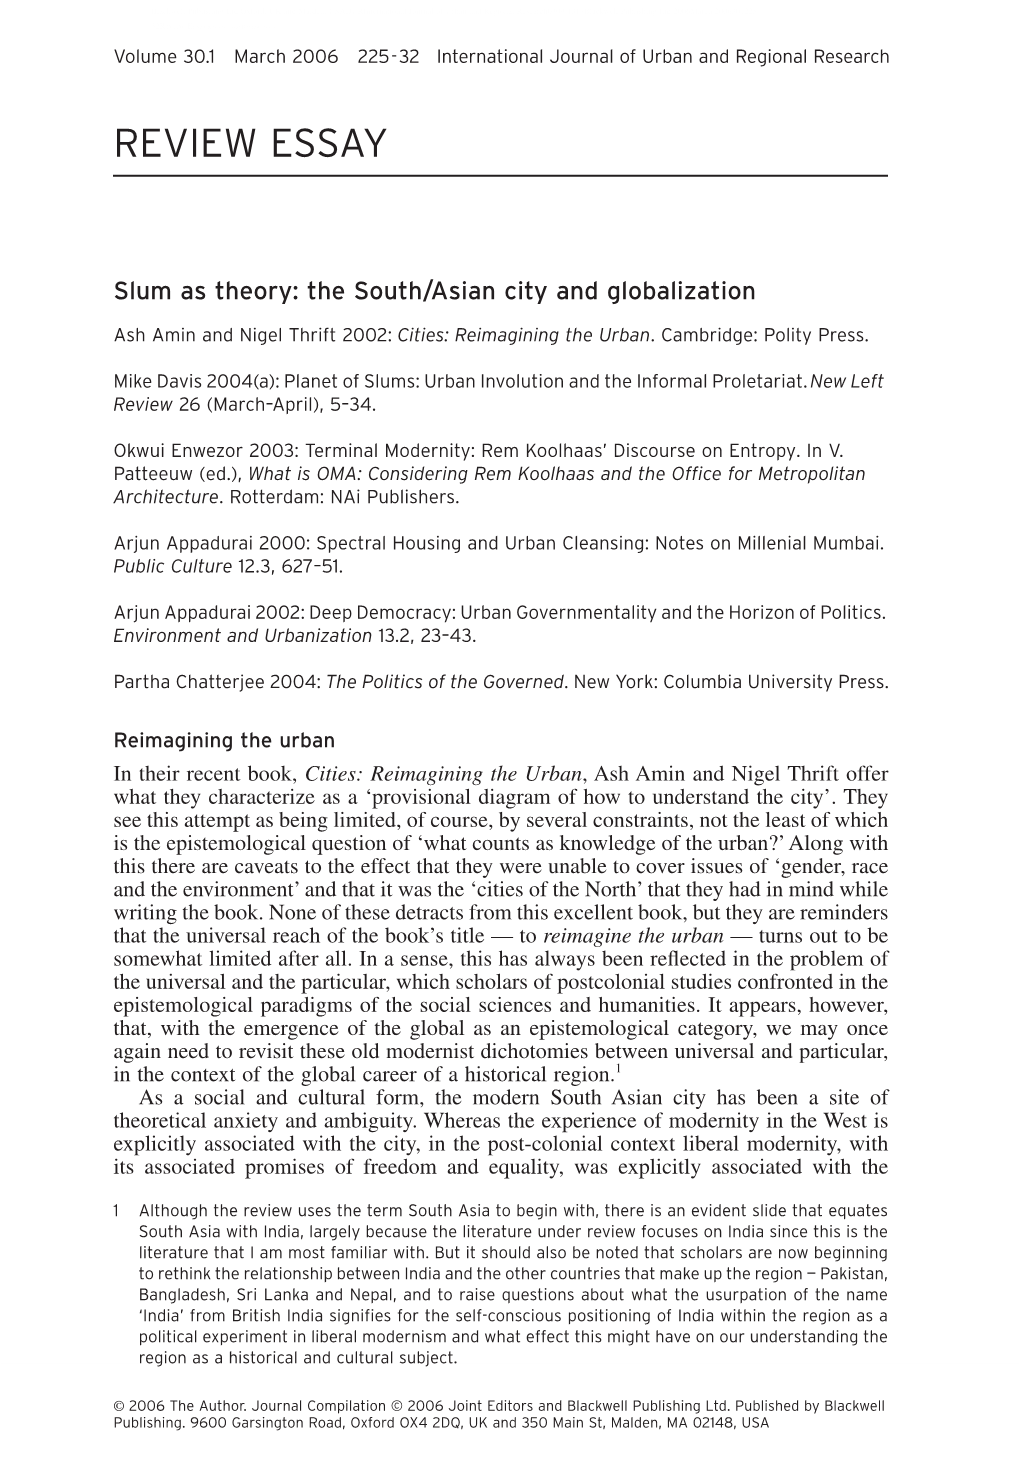 Review Essayreview Essayreview Essay Volume 30.1 March 2006 225-32International Journal of Urban and Regional Research